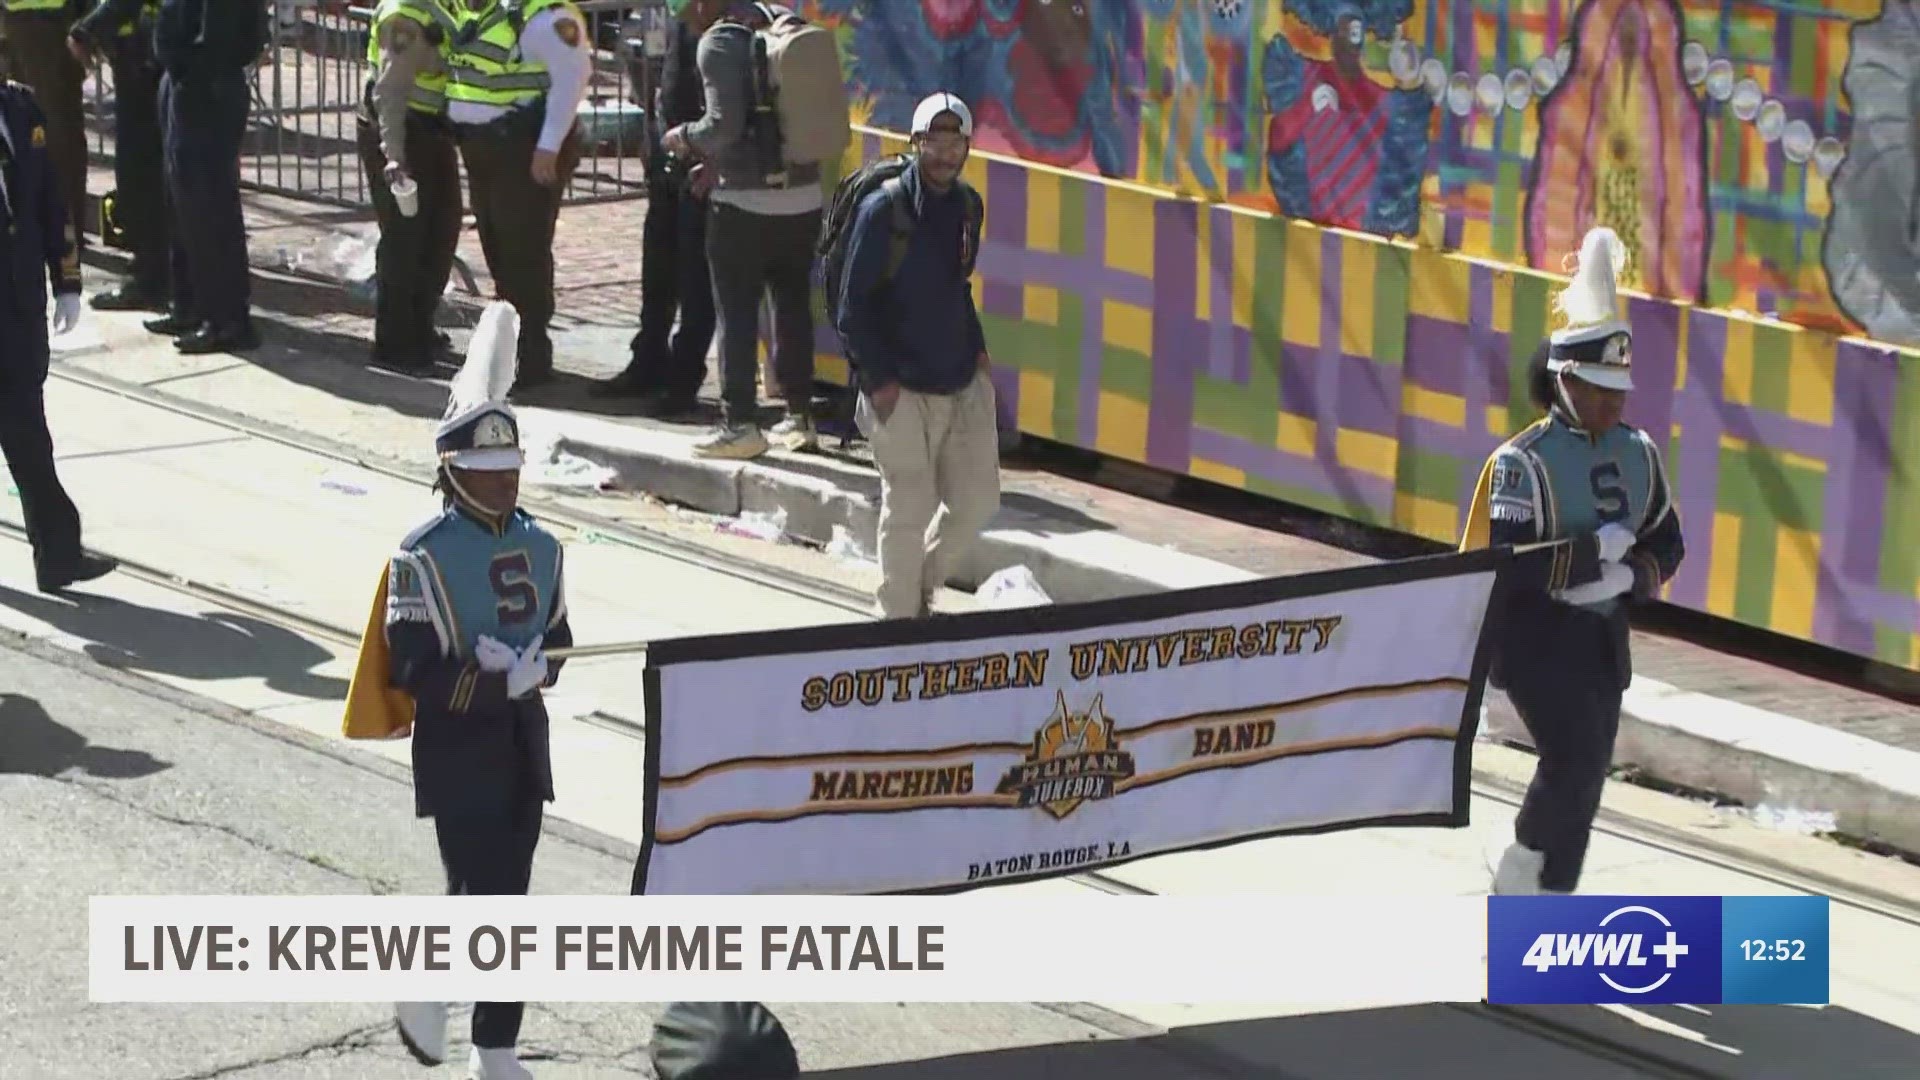 Southern University marching band in the Mystic Krewe of Femme Fatale.